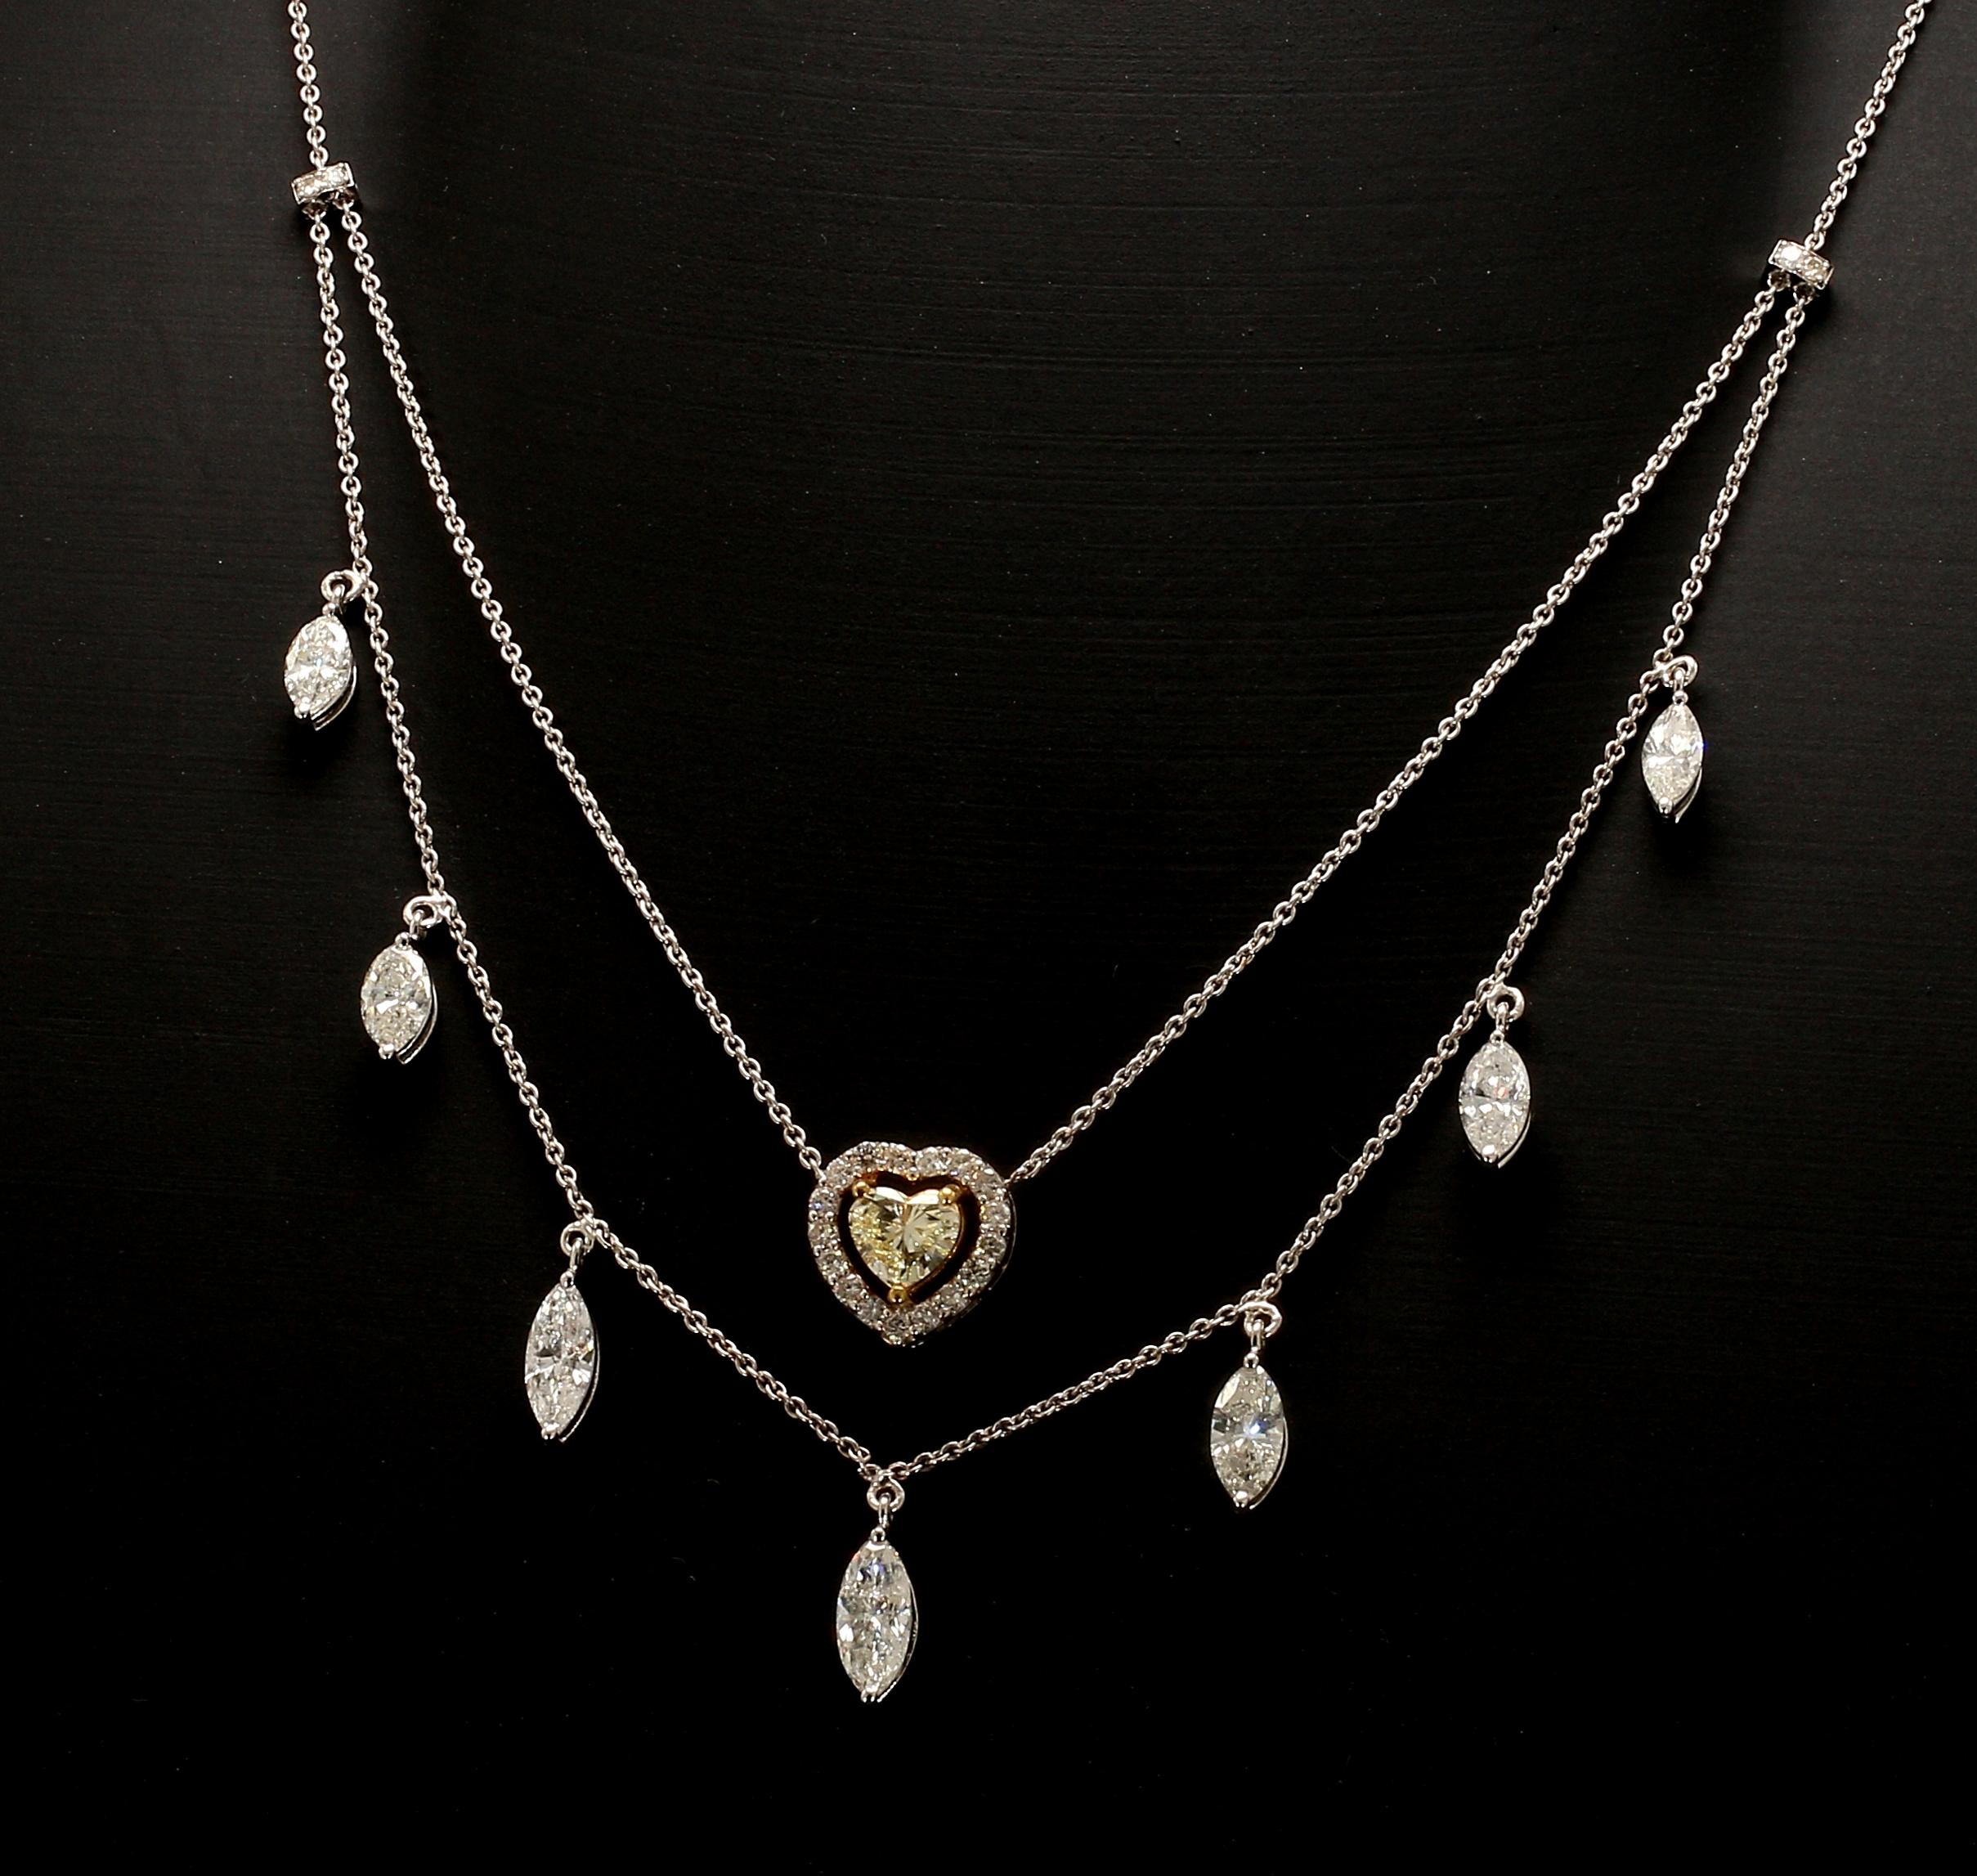 **All jewellery is one-of-a-kind**
**Hallmarked with diamond weight and gold purity**

Introducing our stunning two-row necklace, designed to make a statement and turn heads. The necklace features a beautiful center yellow heart with a halo of